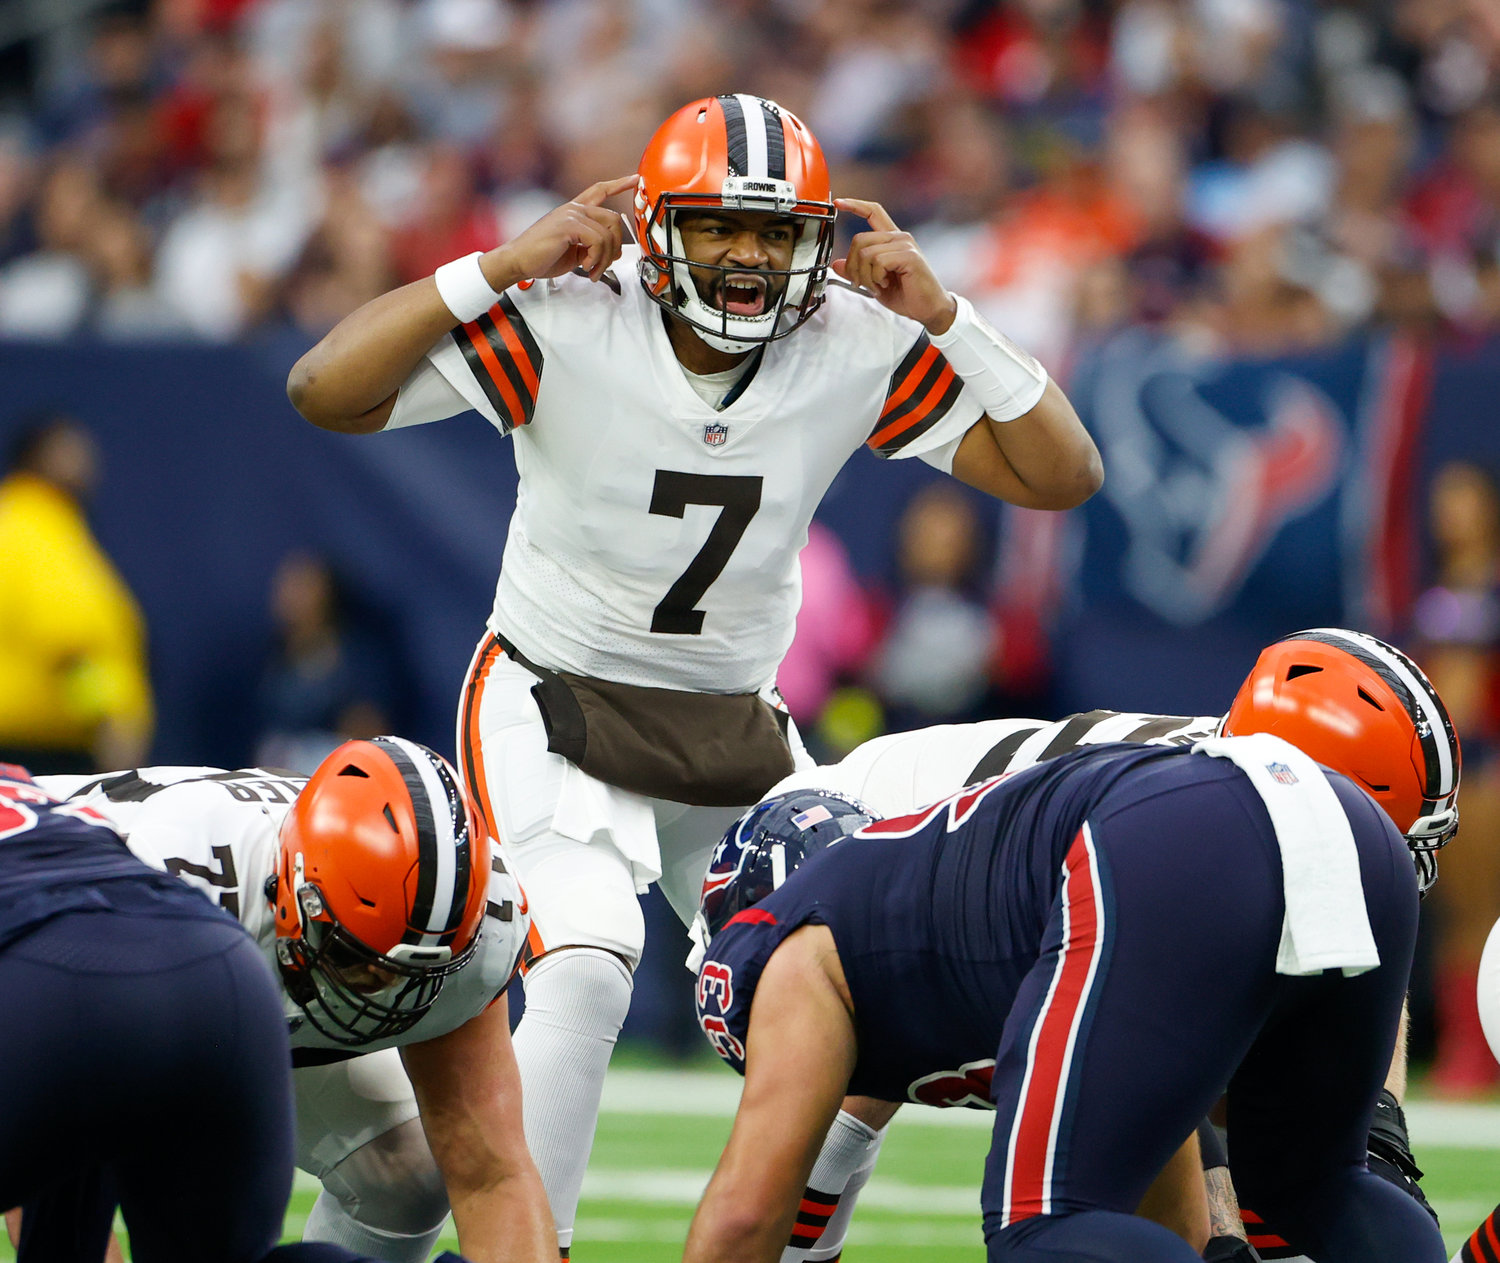 Cleveland Browns quarterback Jacoby Brissett (7) during an NFL game between the Houston Texans and the Cleveland Browns on Dec. 4, 2022, in Houston. The Browns won, 27-14.